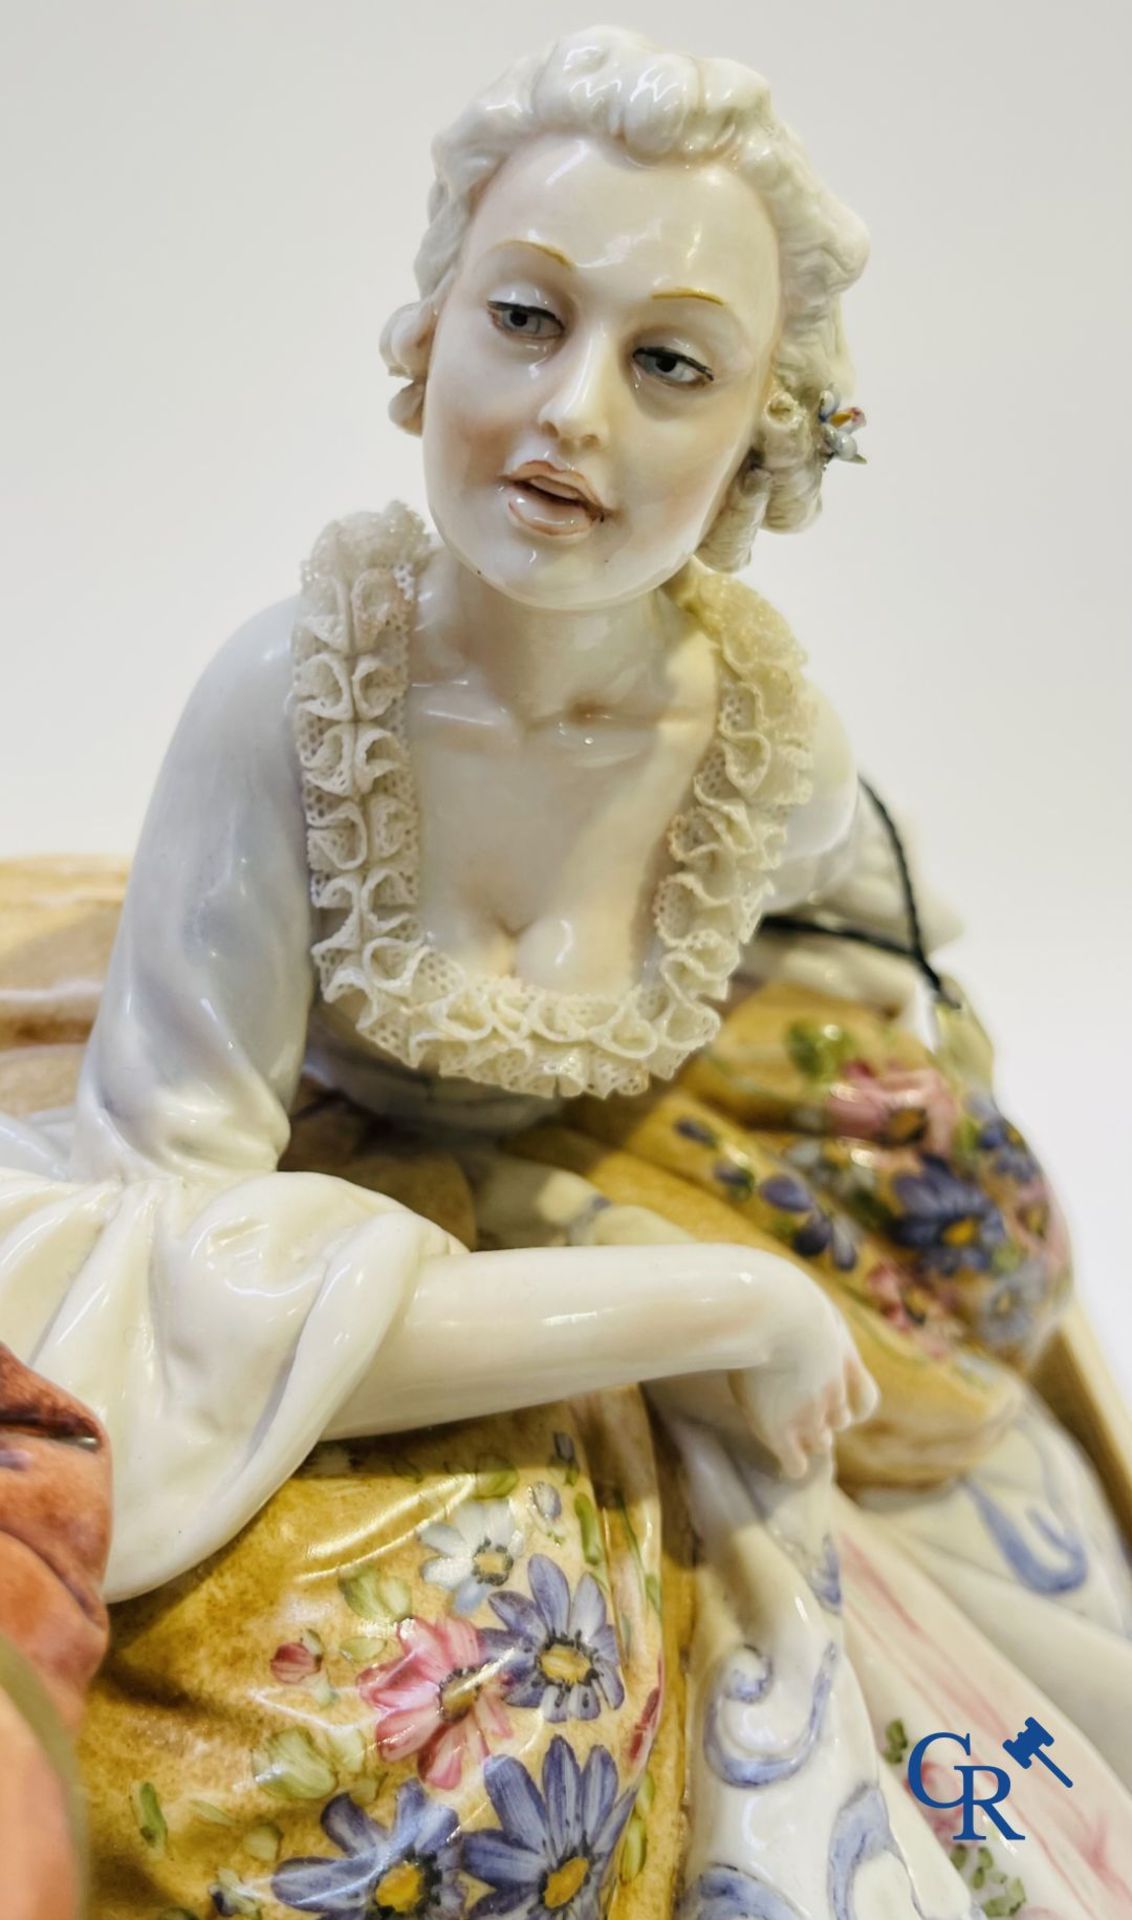 Porcelain: Capodimonte: Exceptional group in Italian porcelain with lace. - Image 11 of 12